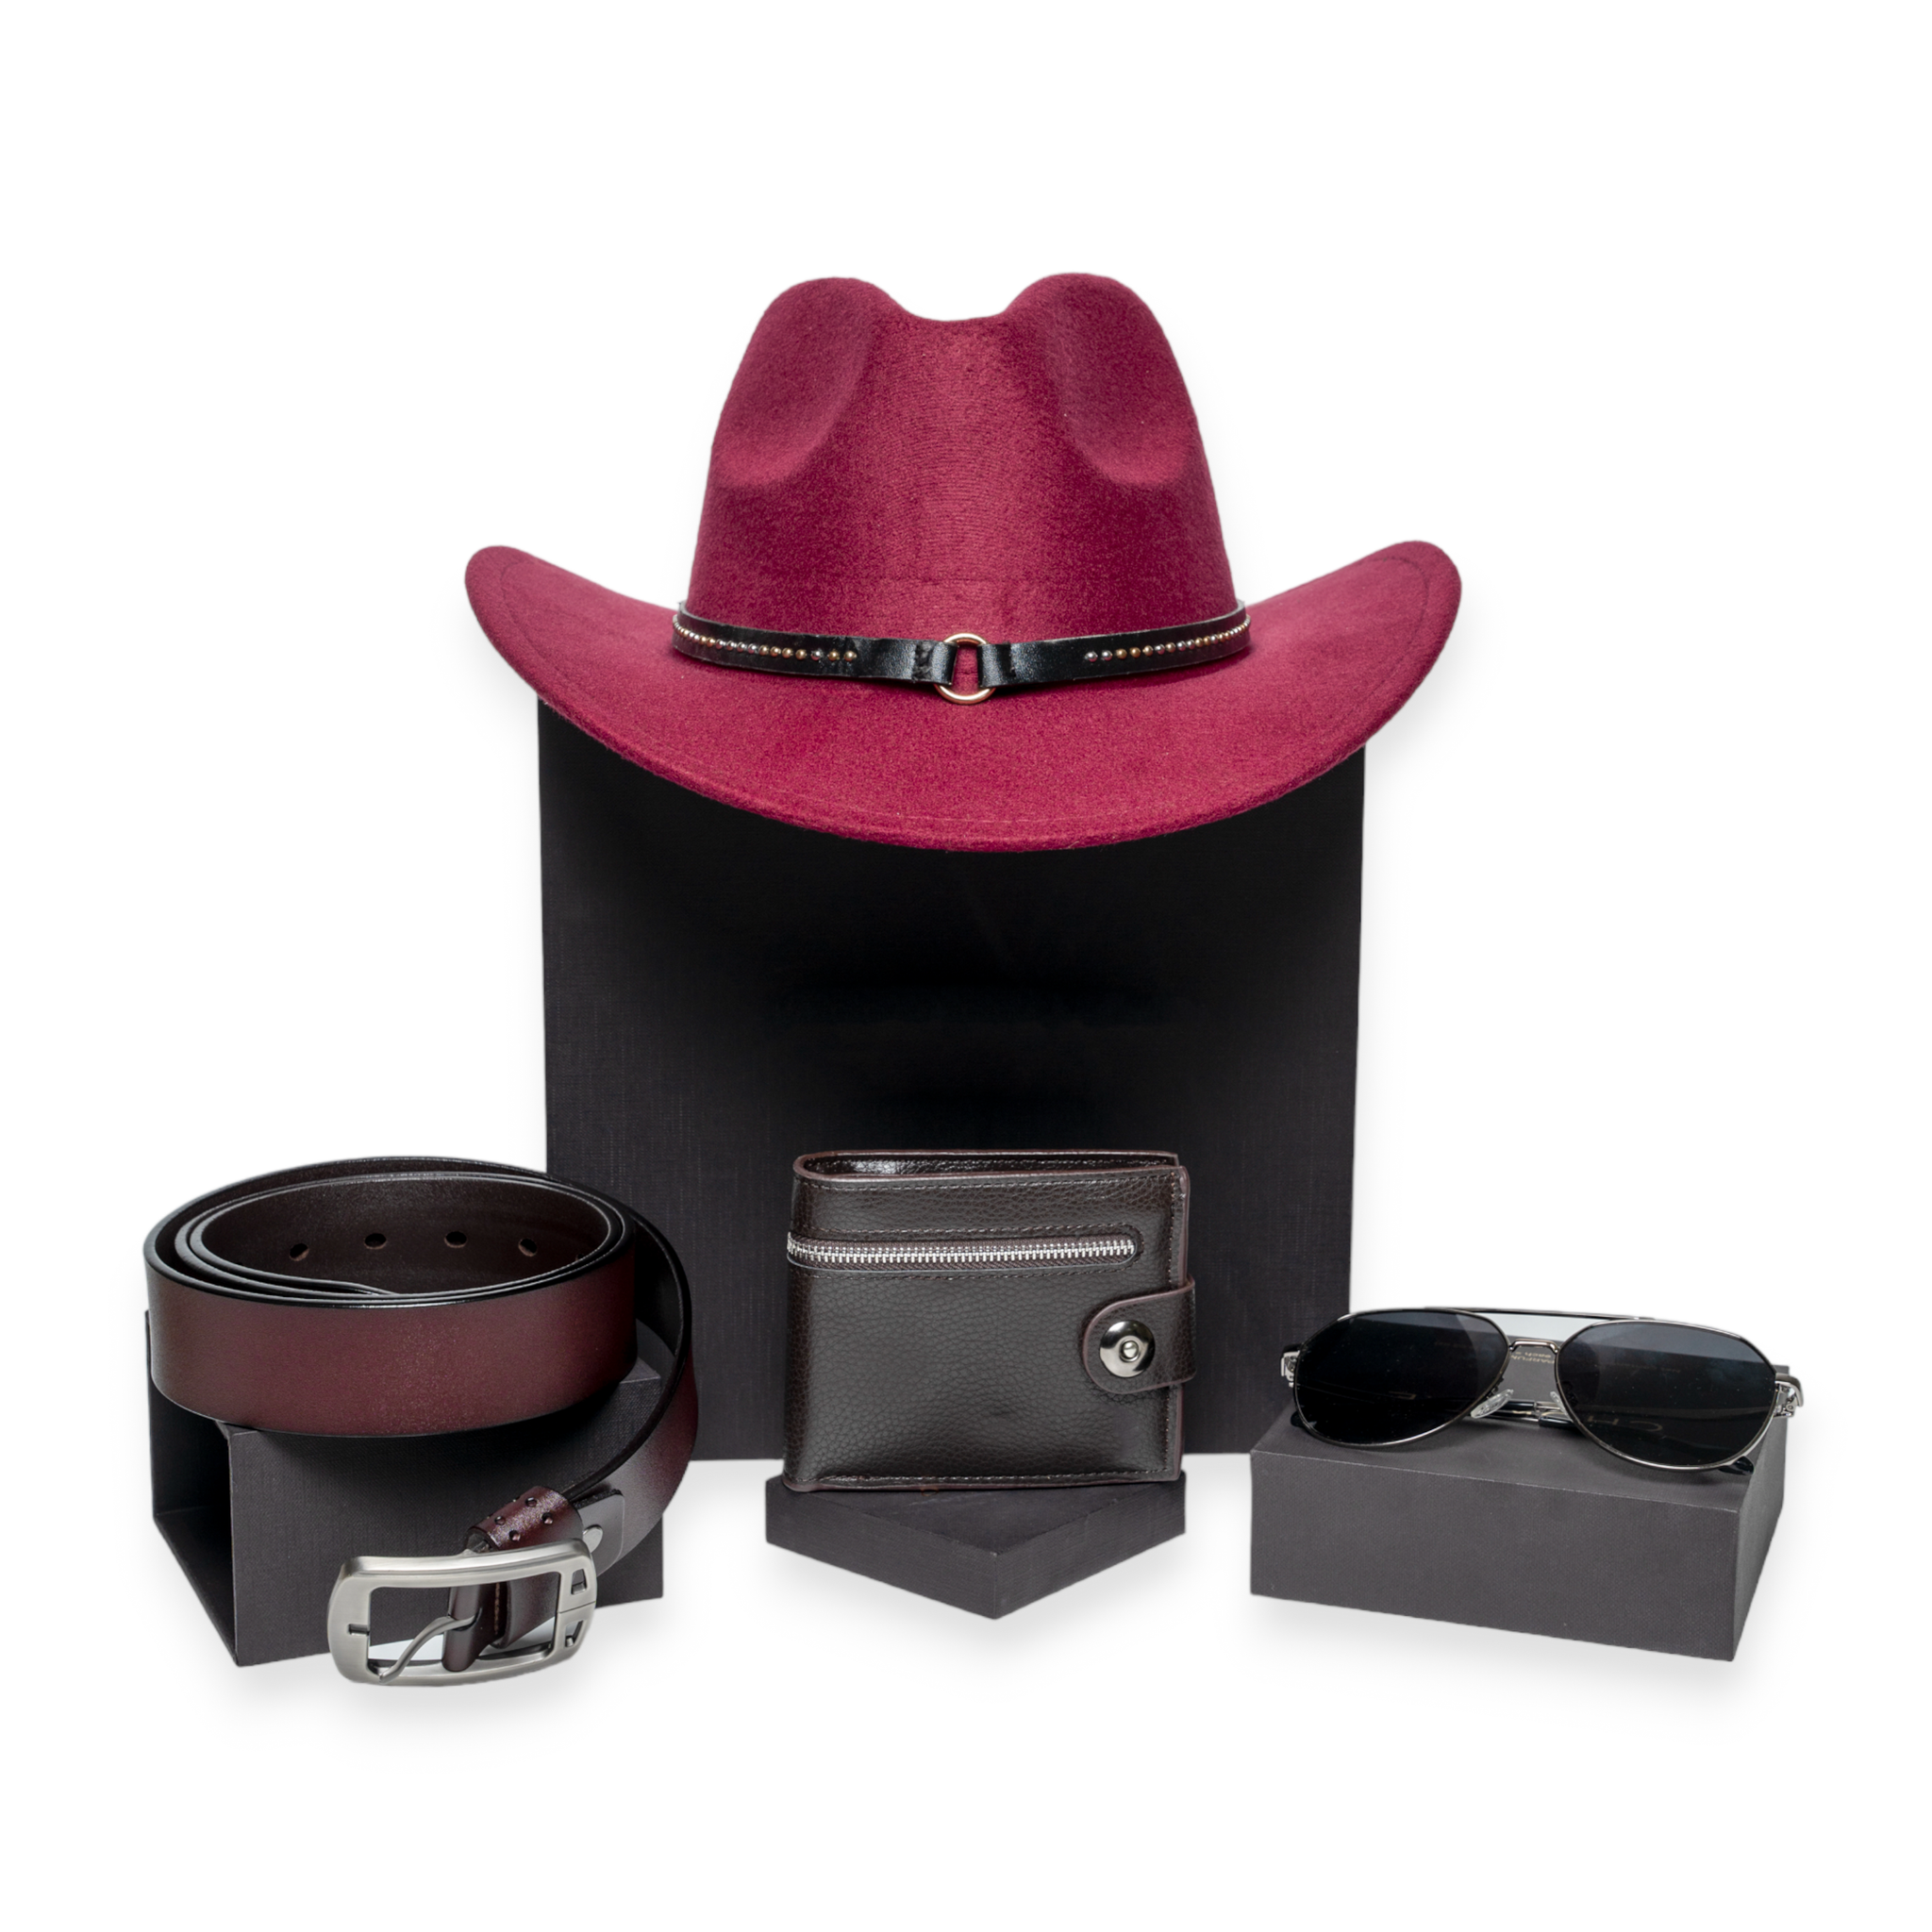 Chokore Special 4-in-1 Gift Set for Him (Belt, Wallet, Hat, & Sunglasses)